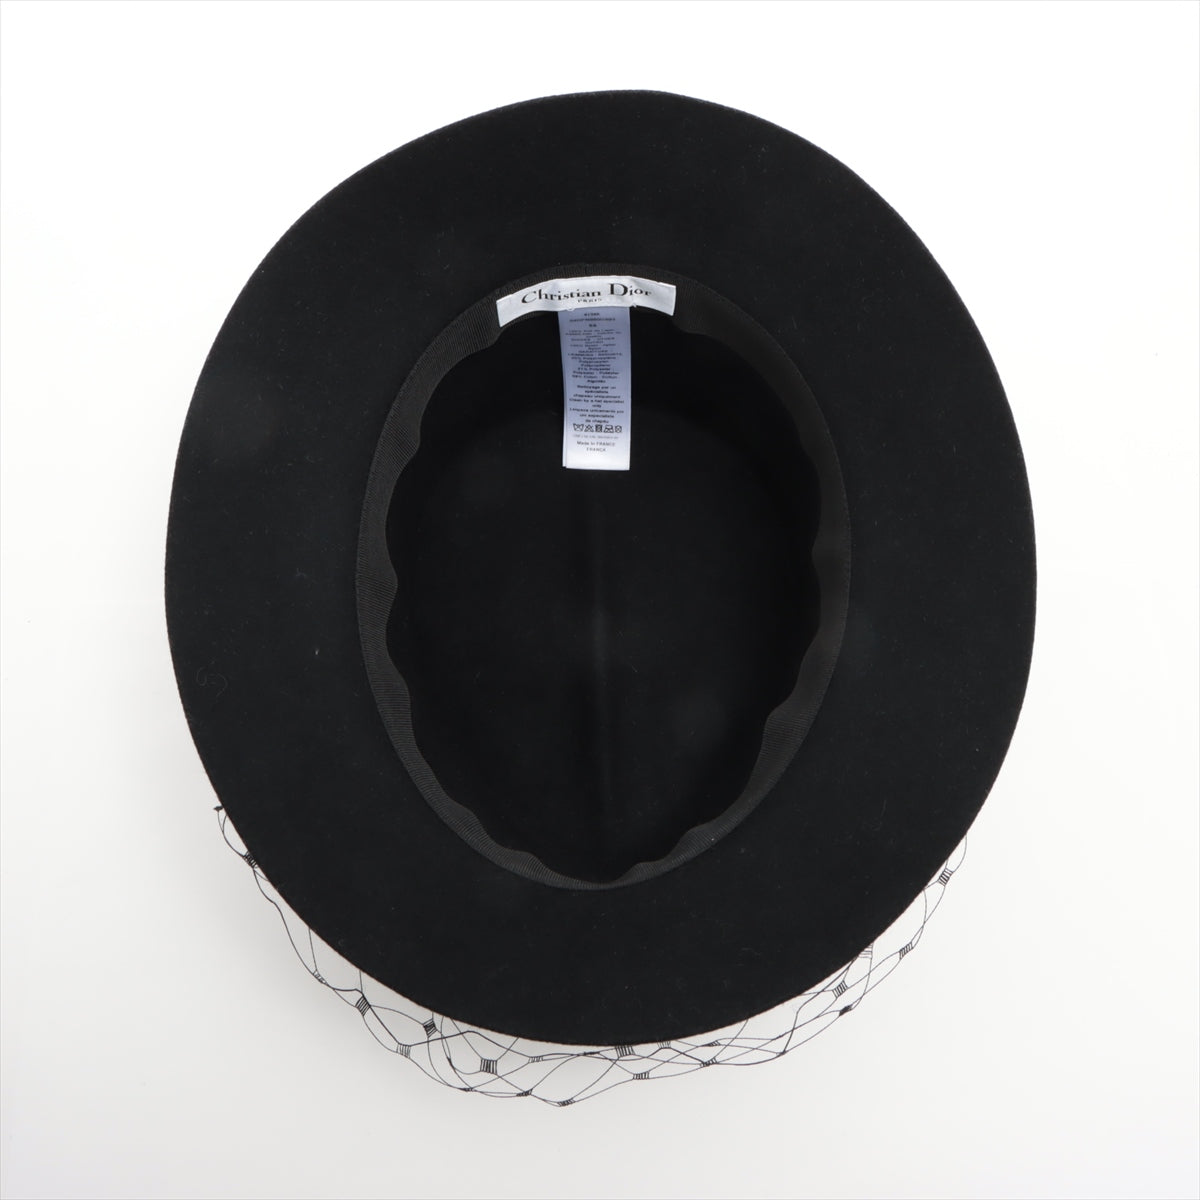 DIOR Hat 58 Rabbit Black 04DPN960G893 with tulle